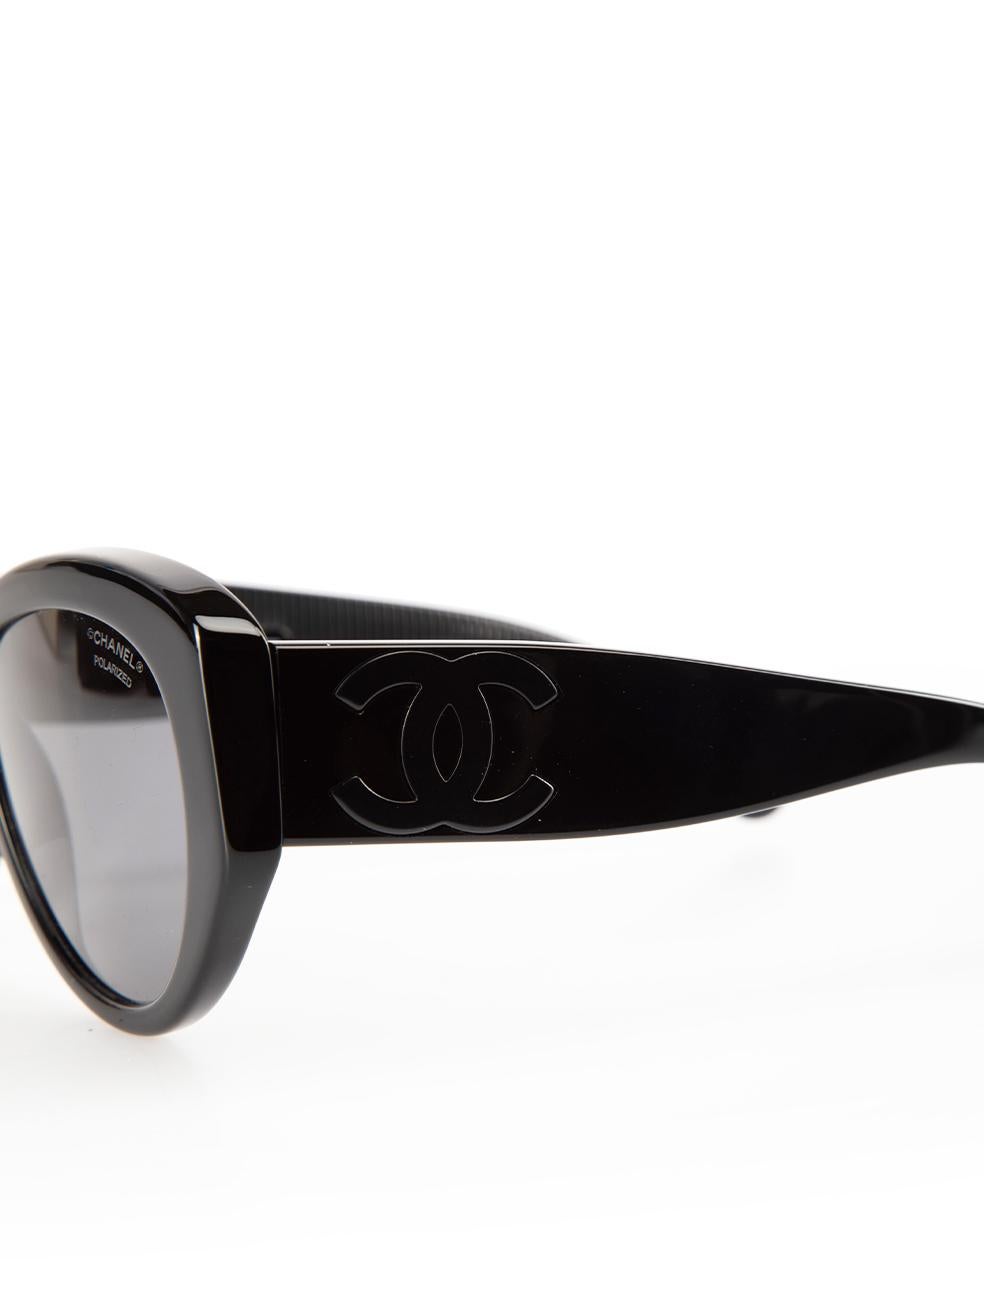 Chanel Black Butterfly Frame Sunglasses For Sale 2